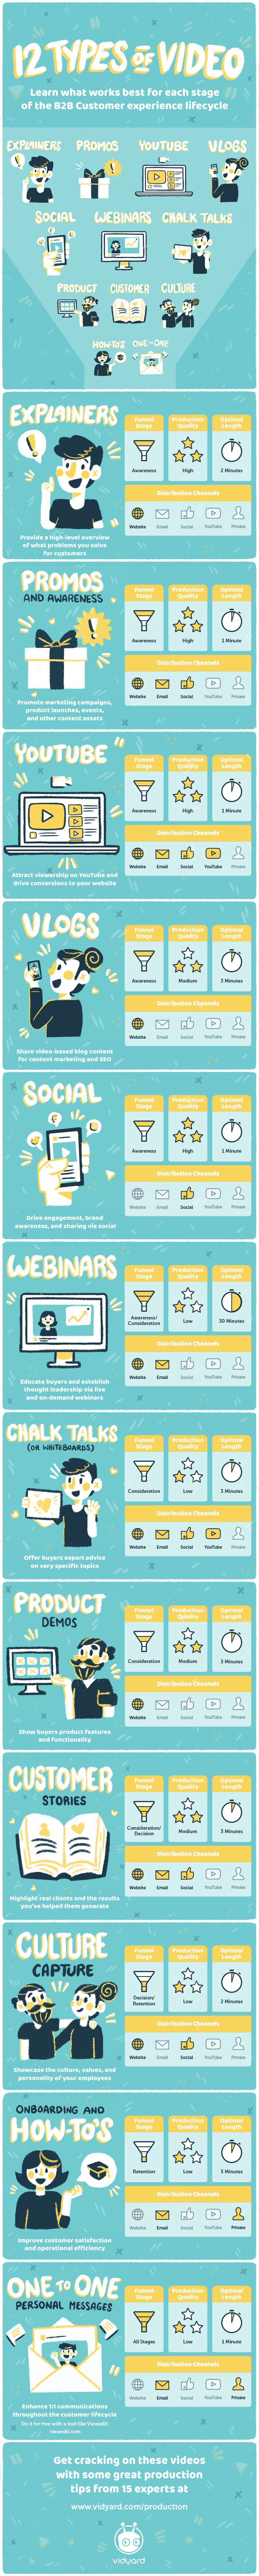 12 Perfect Video Types for the B2B Customer Lifecycle [Infographic]